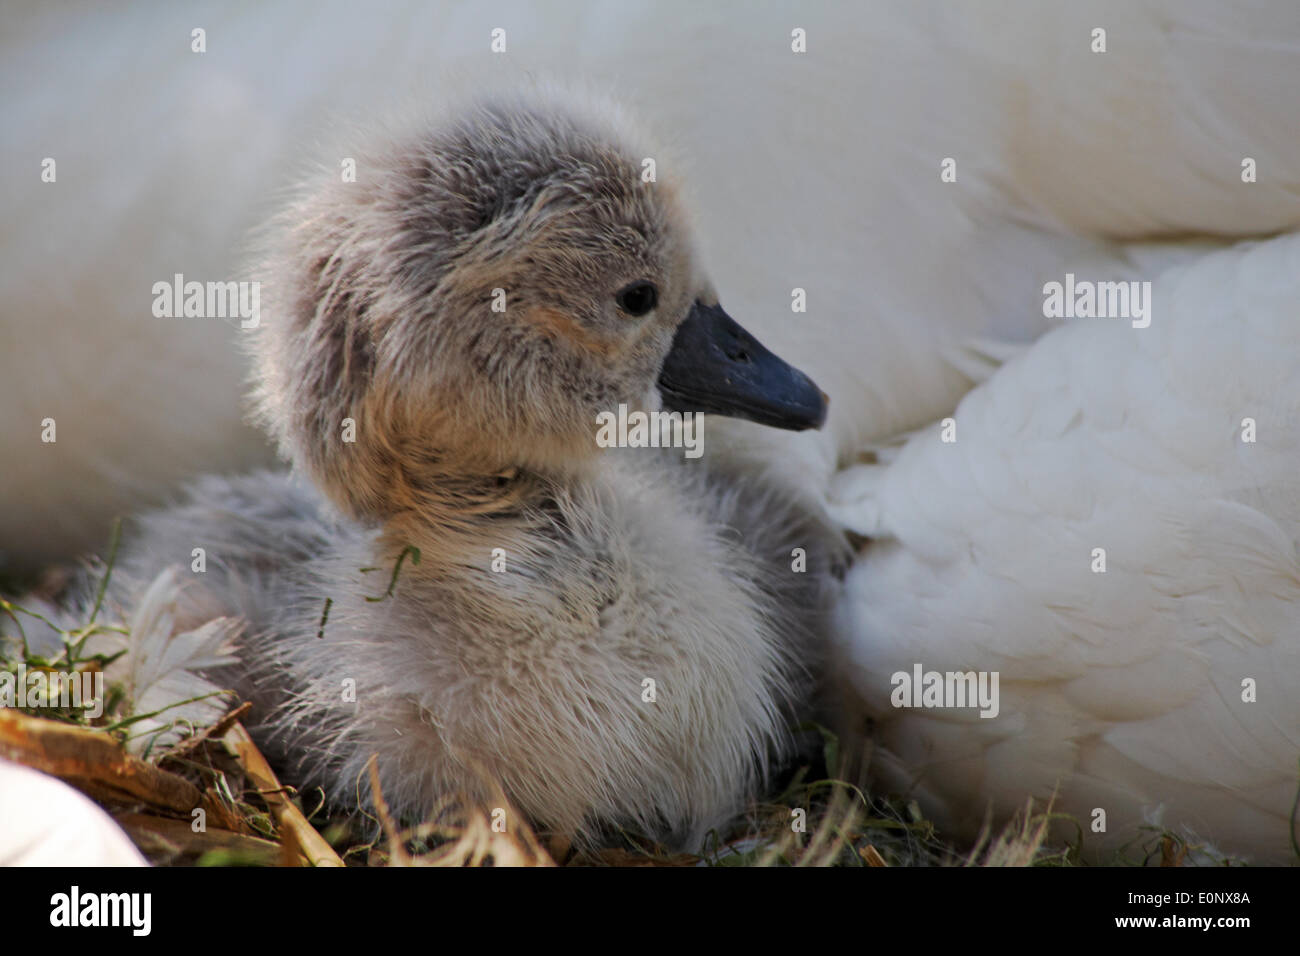 Abbotsbury Swannery, Dorset UK 17 May 2014. Baby swans swan hatch and fluffy cygnets cygnet appear. Abbotsbury Swannery is the world's only colony of nesting mute swans, Cygnus olor. Credit:  Carolyn Jenkins/Alamy Live News Stock Photo